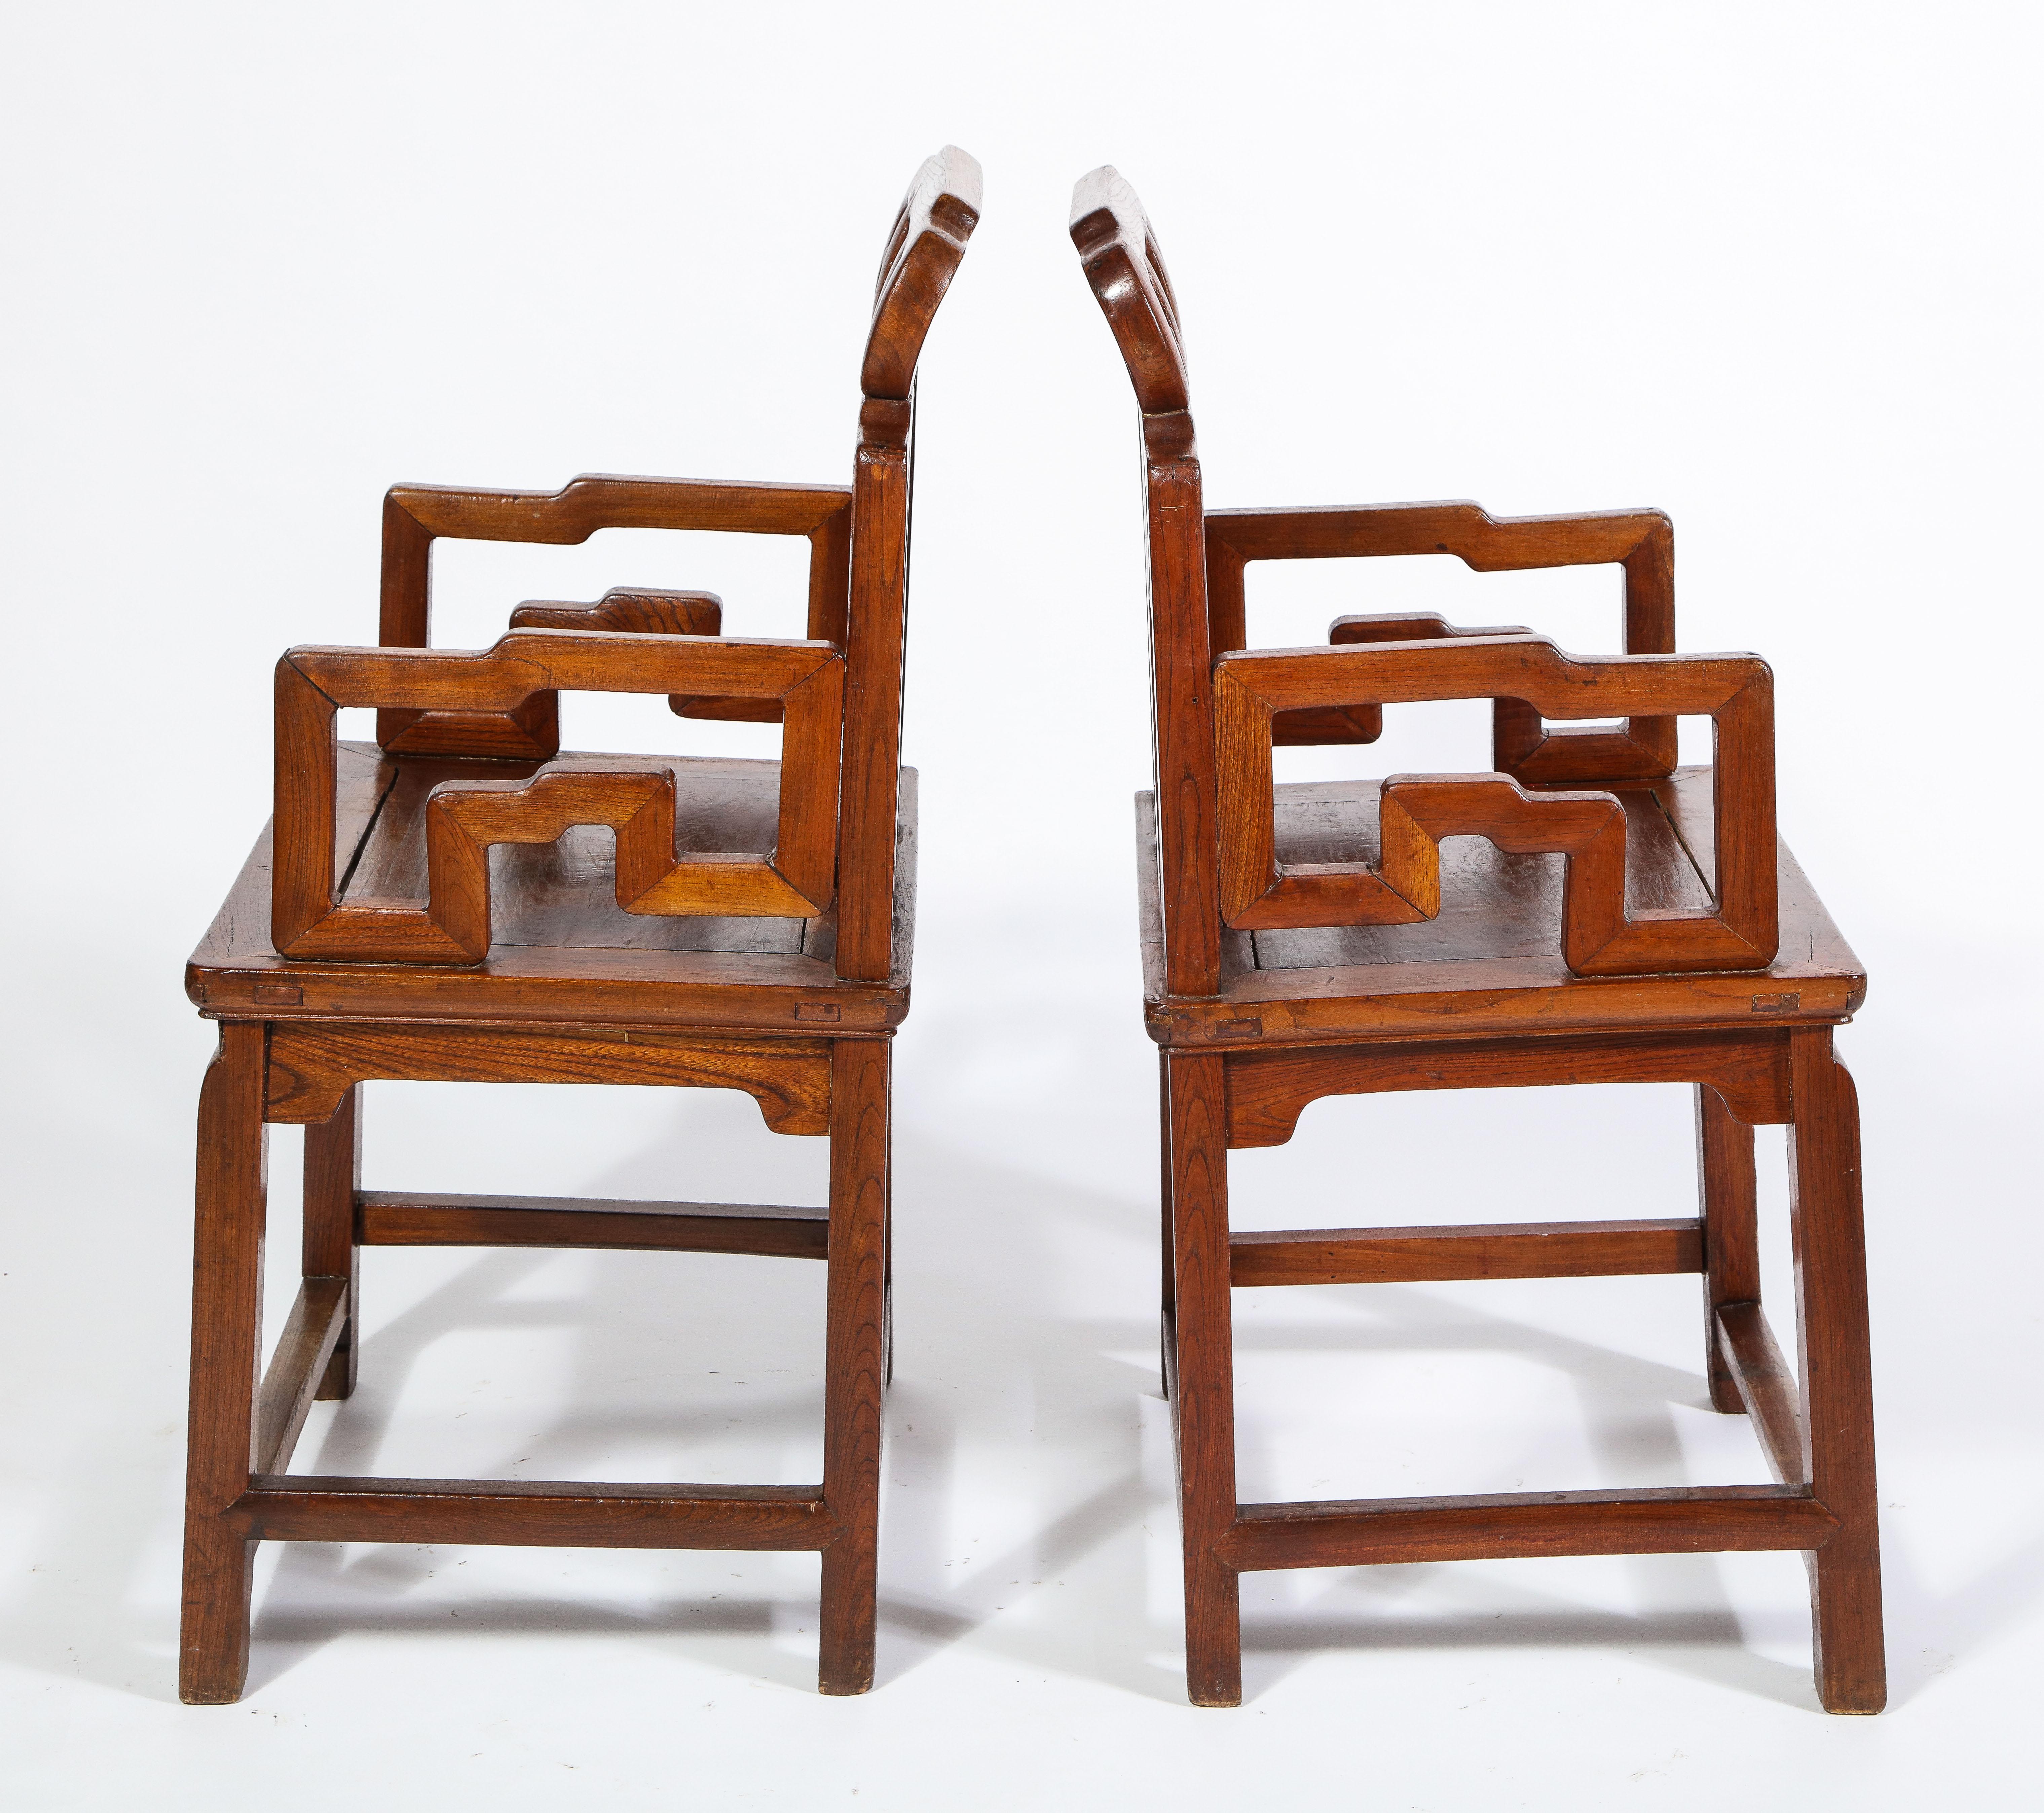 Chinese Export Pair of Chinese Hardwood Chairs with Fretwork Designs and High Relief Panels For Sale